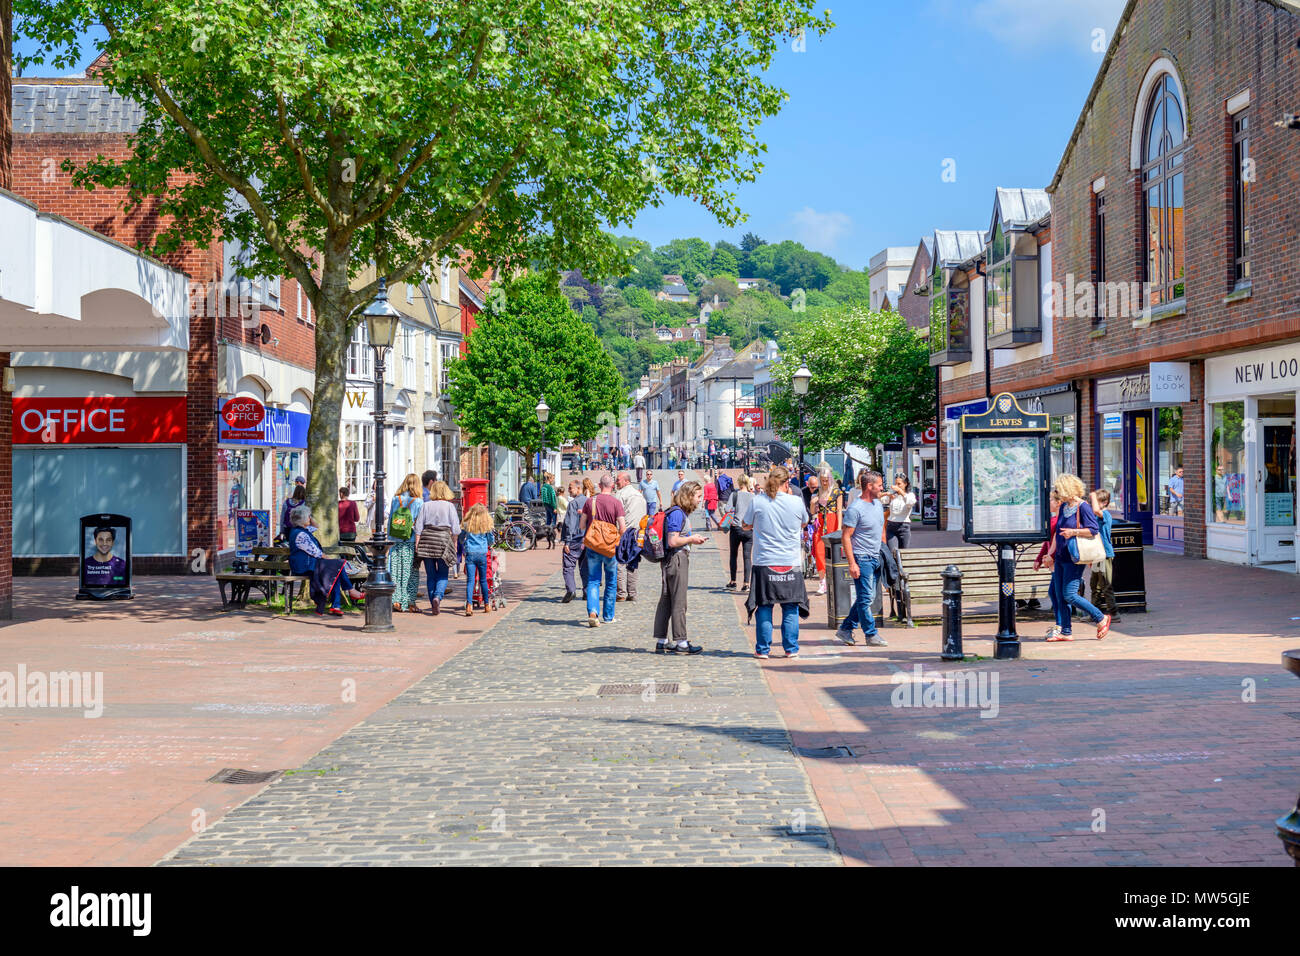 The high street Lewes, a pedestrianised shopping street Stock Photo